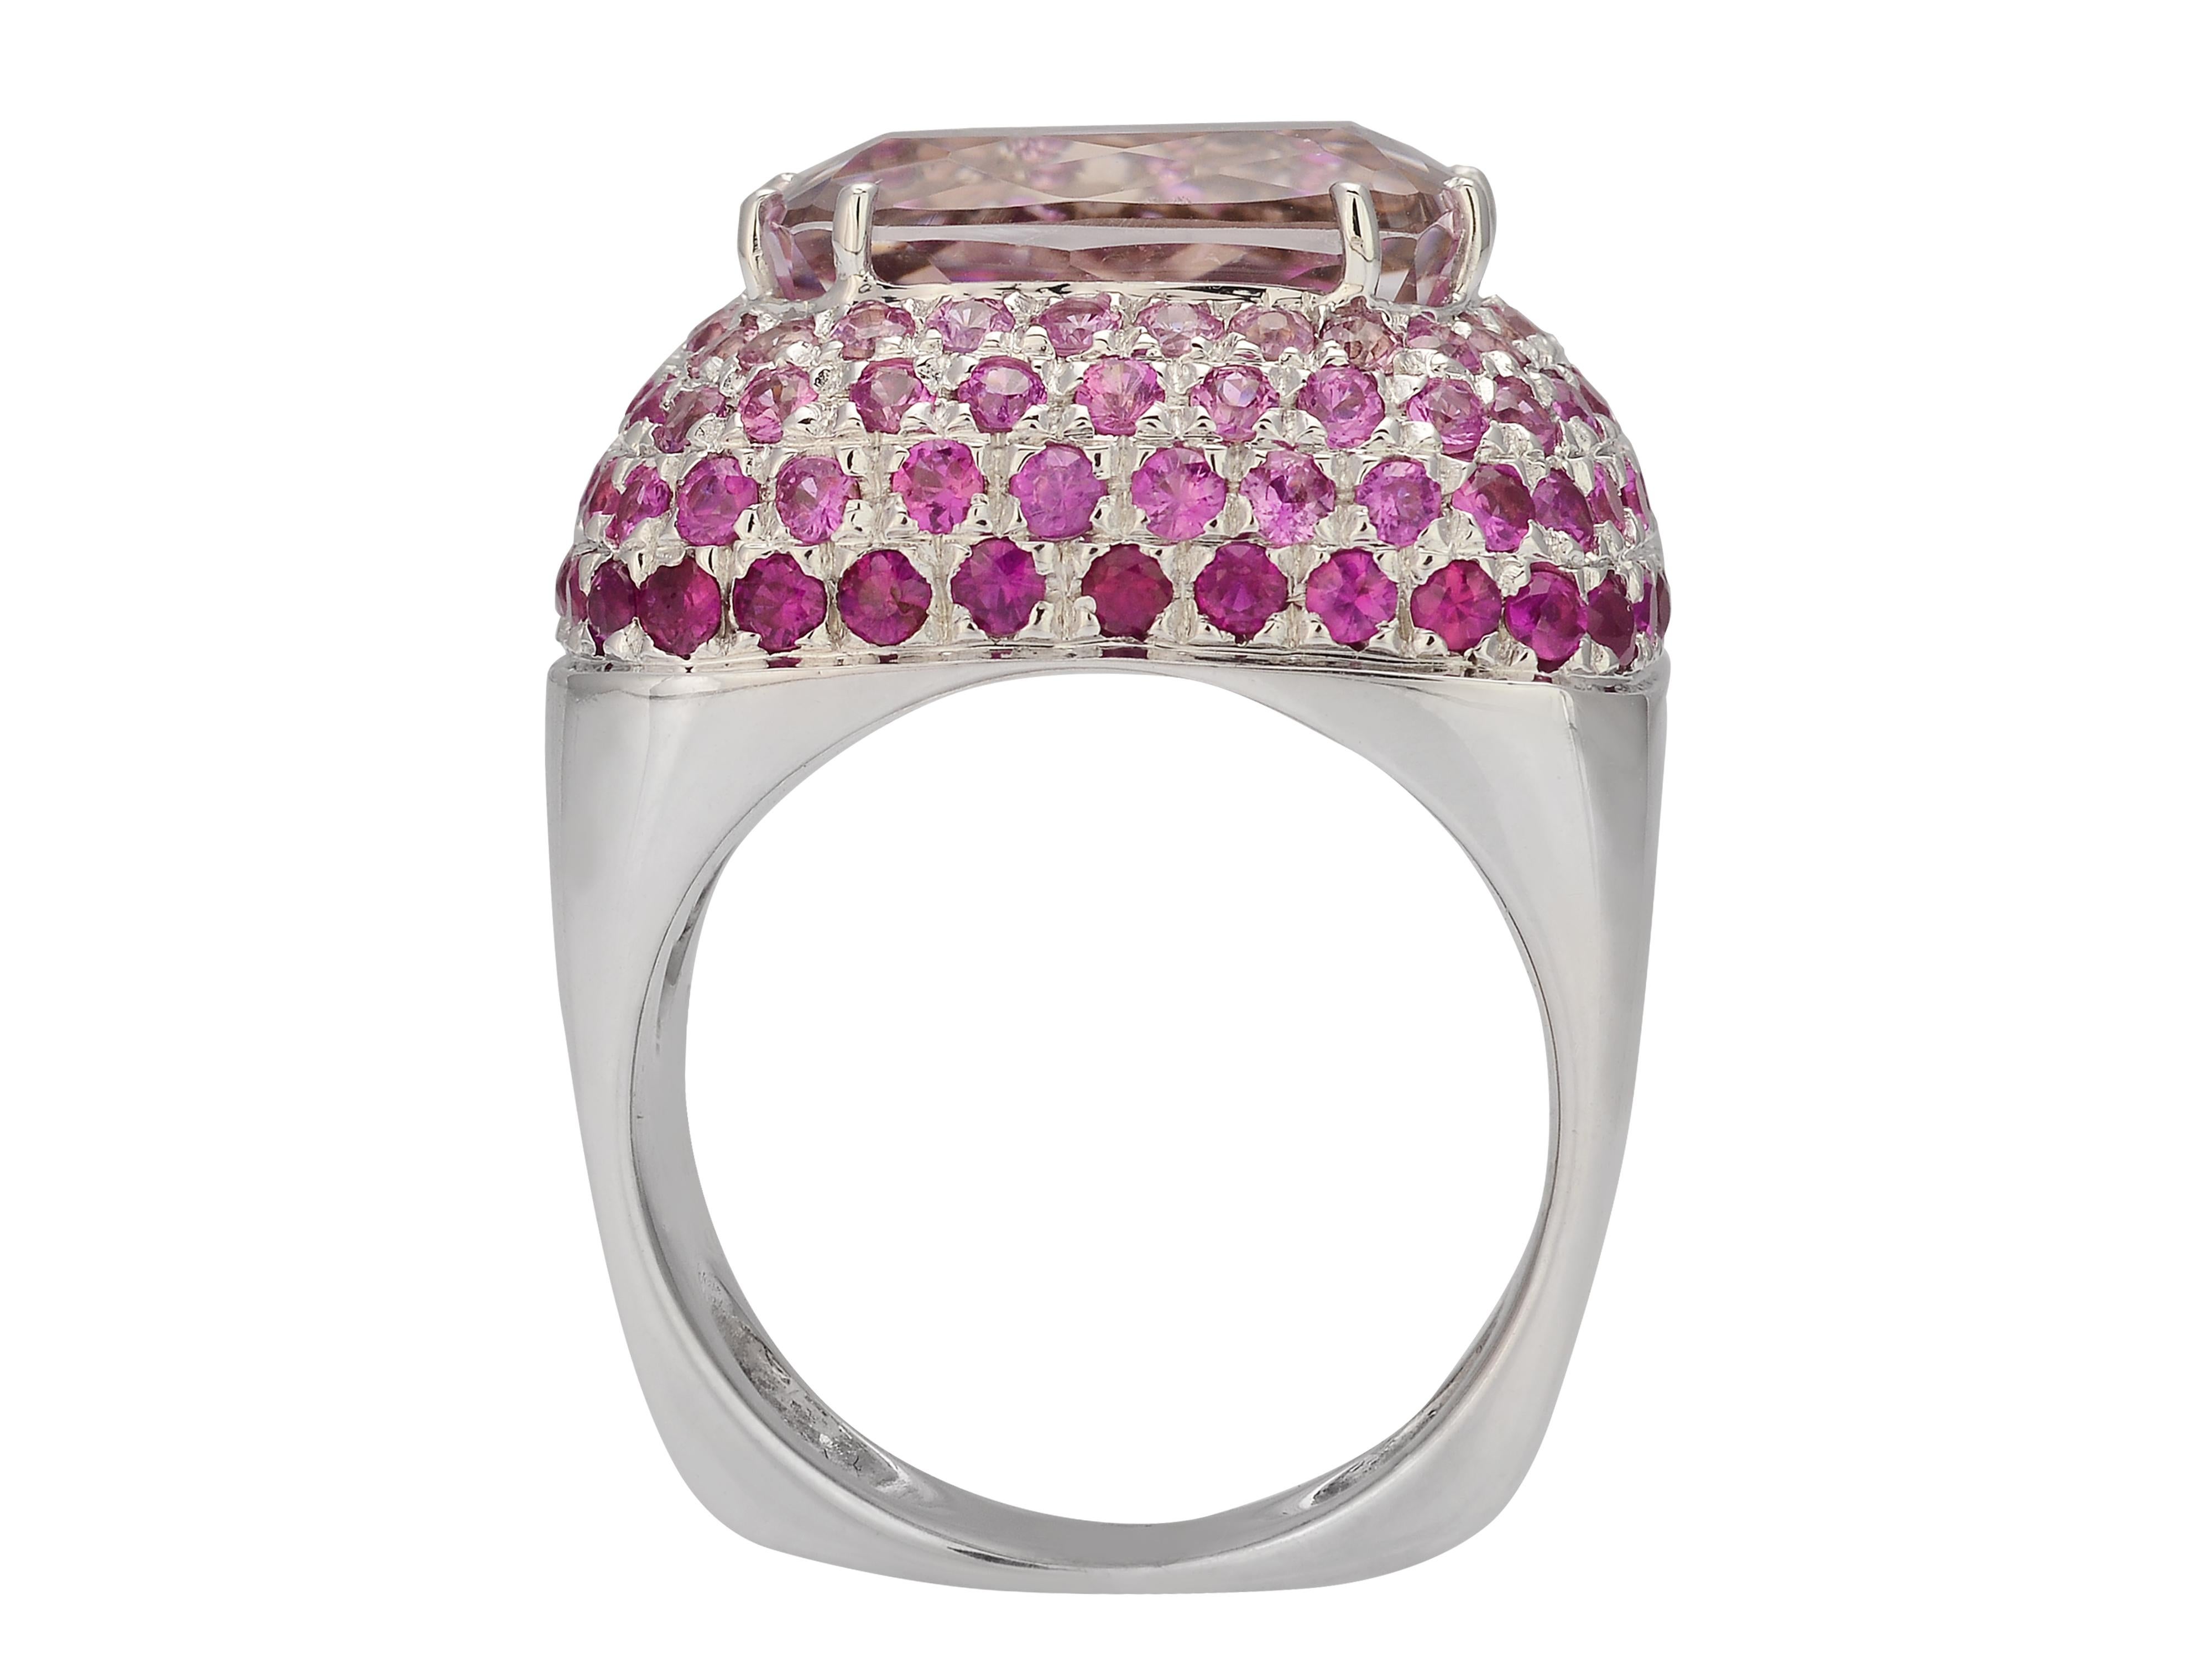 18 karat white gold wide cocktail ring featuring a prong-set 8.50 carat Kunzite center stone. The kunzite is surrounded by 114 pave-set pink sapphires and rubies totaling 3.50 carats. Finger size 7; purchase includes ring sizing.